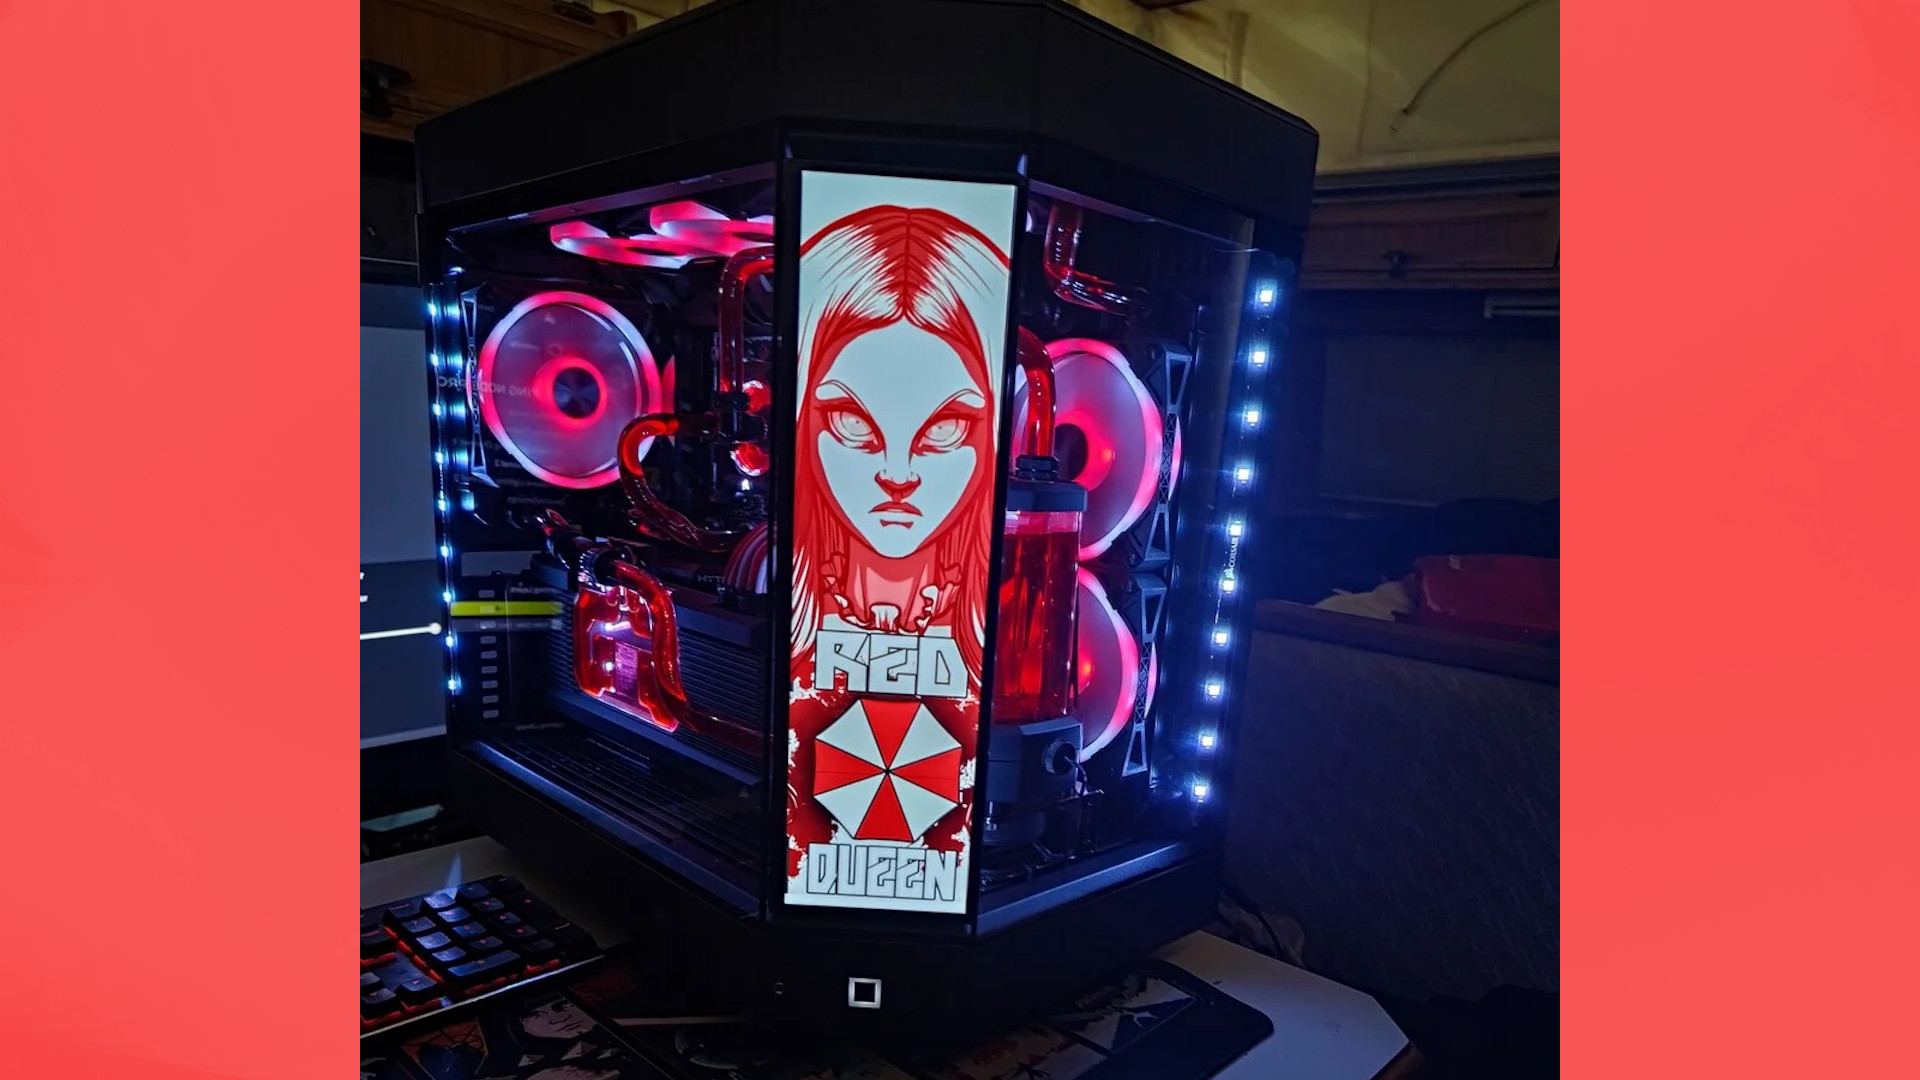 The Red Queen has taken over this AMD-powered Resident Evil gaming PC